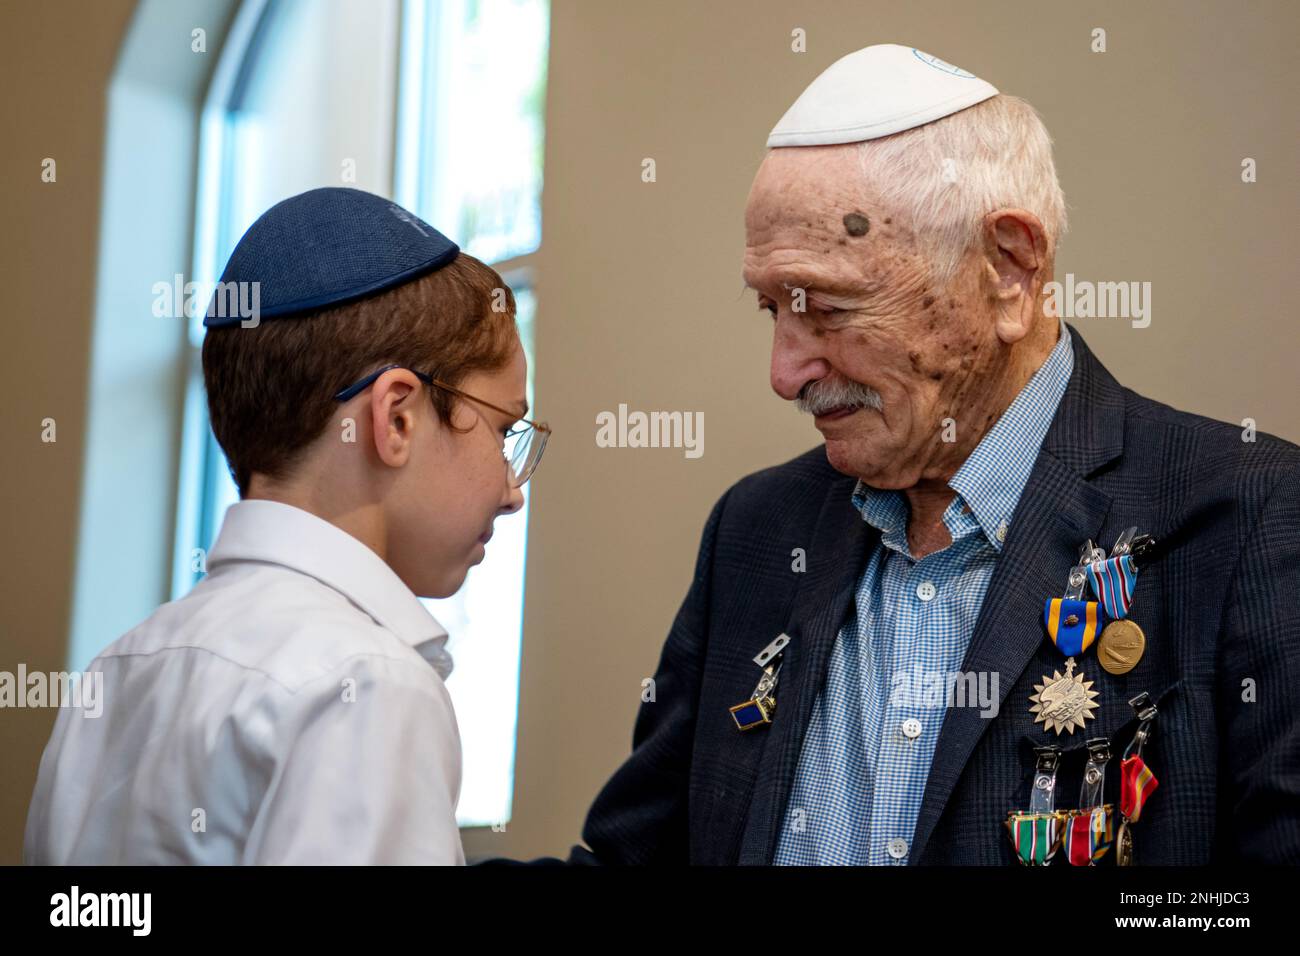 U.S. Army Air Corps 1st Lt. Gerald Teldon (right), retired, receives his ribbons from his great grandson, Menachem Mendel Teldon, for his honorable service as a pilot on July 29, 2022, at the Chabad Center for Jewish Life and Learning, San Antonio, Texas. Teldon, born in Bronx, N.Y., in 1924, joined the military in 1944. He completed 62 missions during WWII and the Korean War. Lt. Col. Andrew Stein, 502nd Operations Support Squadron commander, was the presiding officers. The awards presented to Teldon are as follows: the Air Medal; American Campaign Medal; European – African – Middle Eastern C Stock Photo